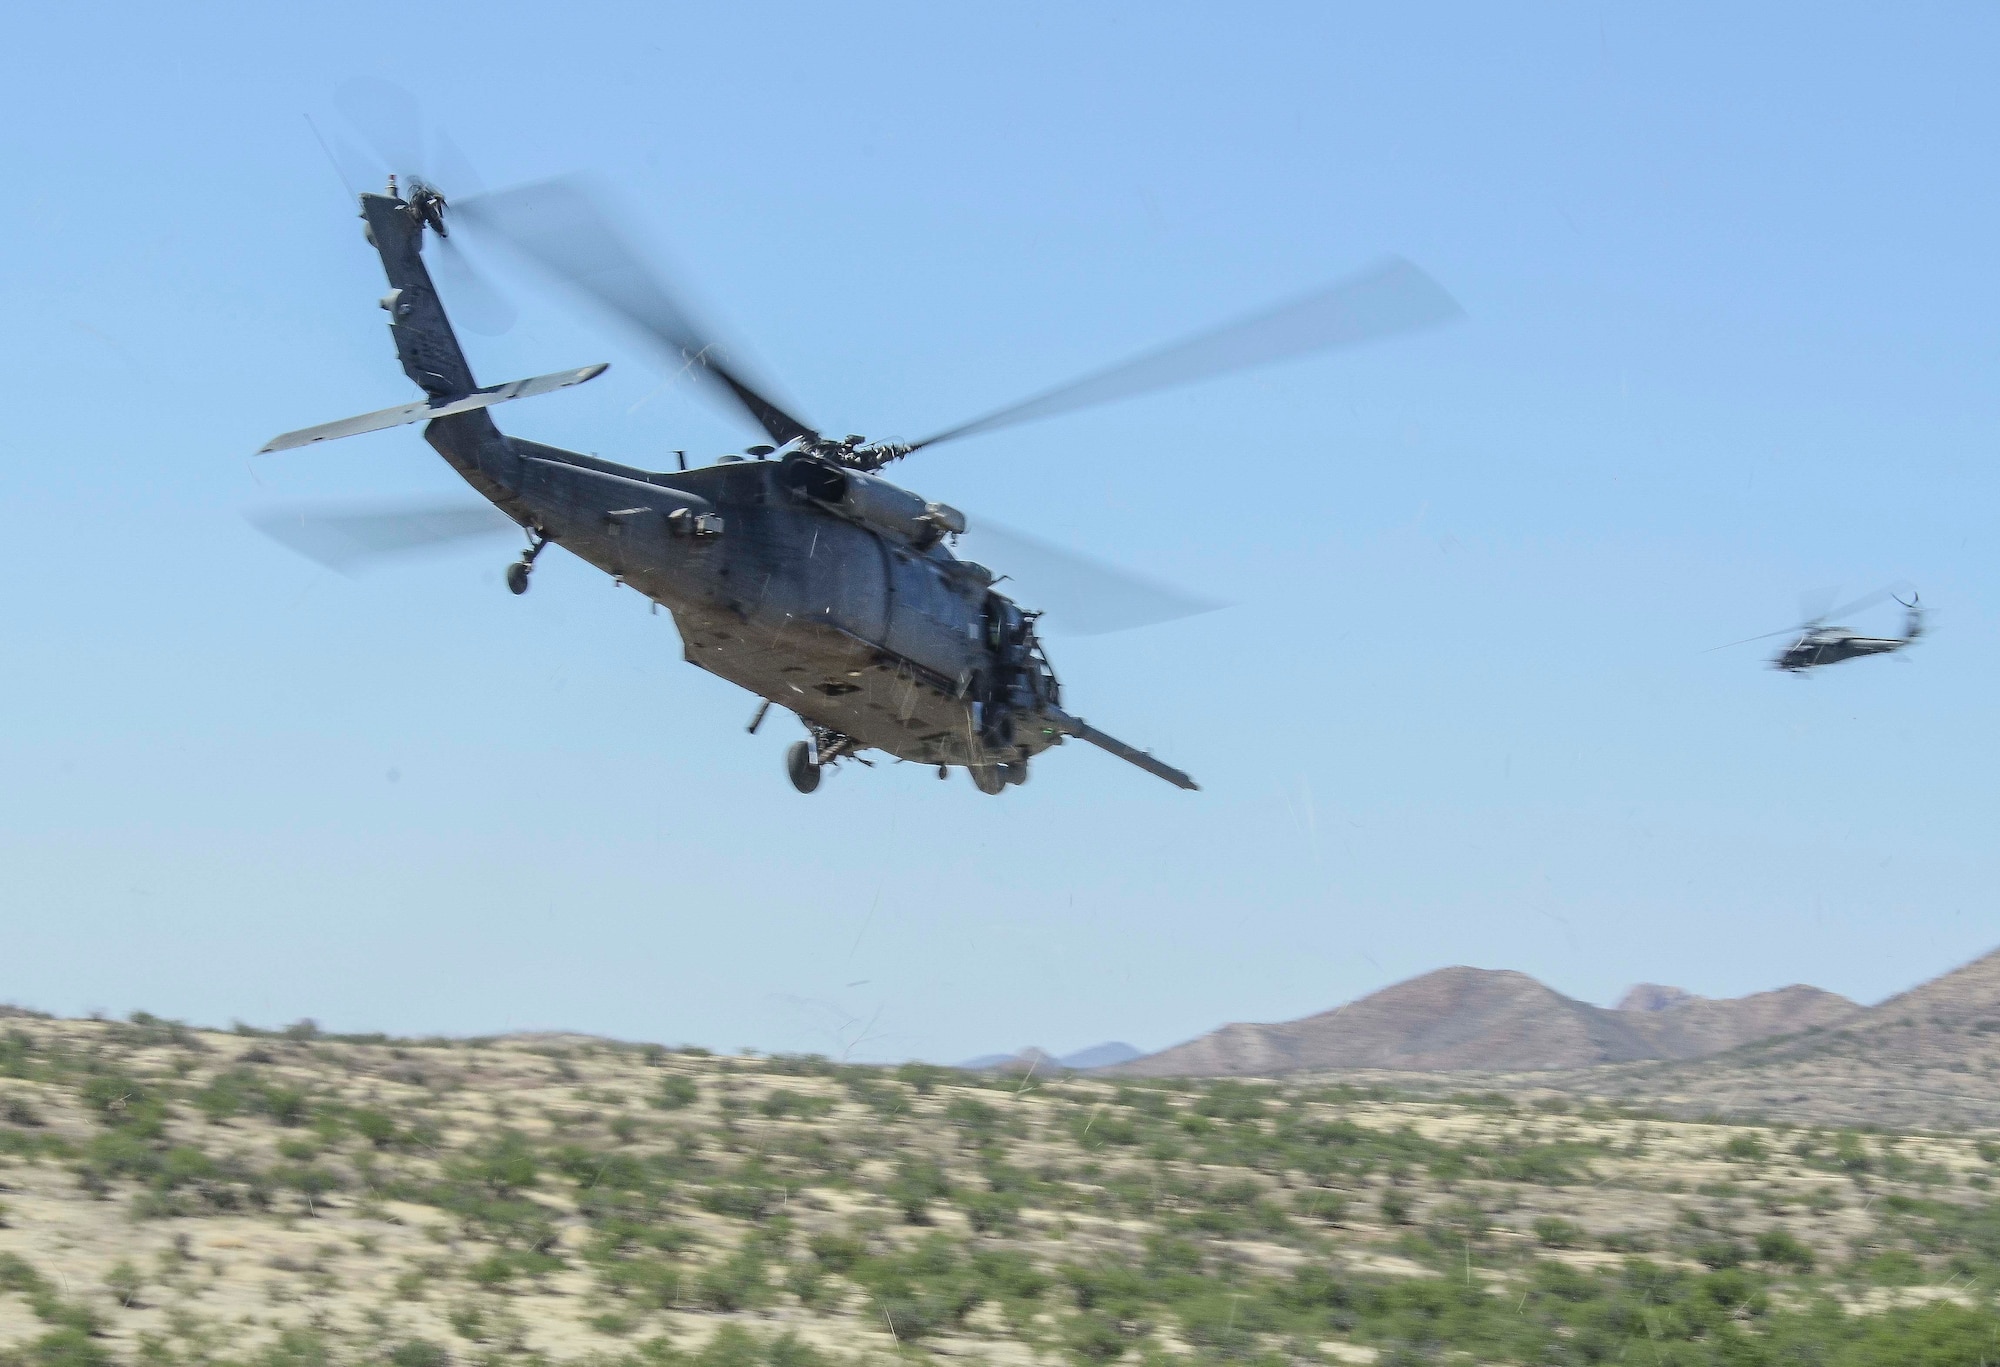 After extracting a downed pilot two HH-60’s return to Davis-Monthan Air Force Base, during a Combat Search and Rescue Exercise in Southern Ariz., April 29, 2014. The main objective of this exercise was to effectively integrate communications across joint platforms to authenticate, locate and protect isolated personnel while successfully extracting them. (U.S. Air Force photo by Staff Sgt. Adam Grant/Released)